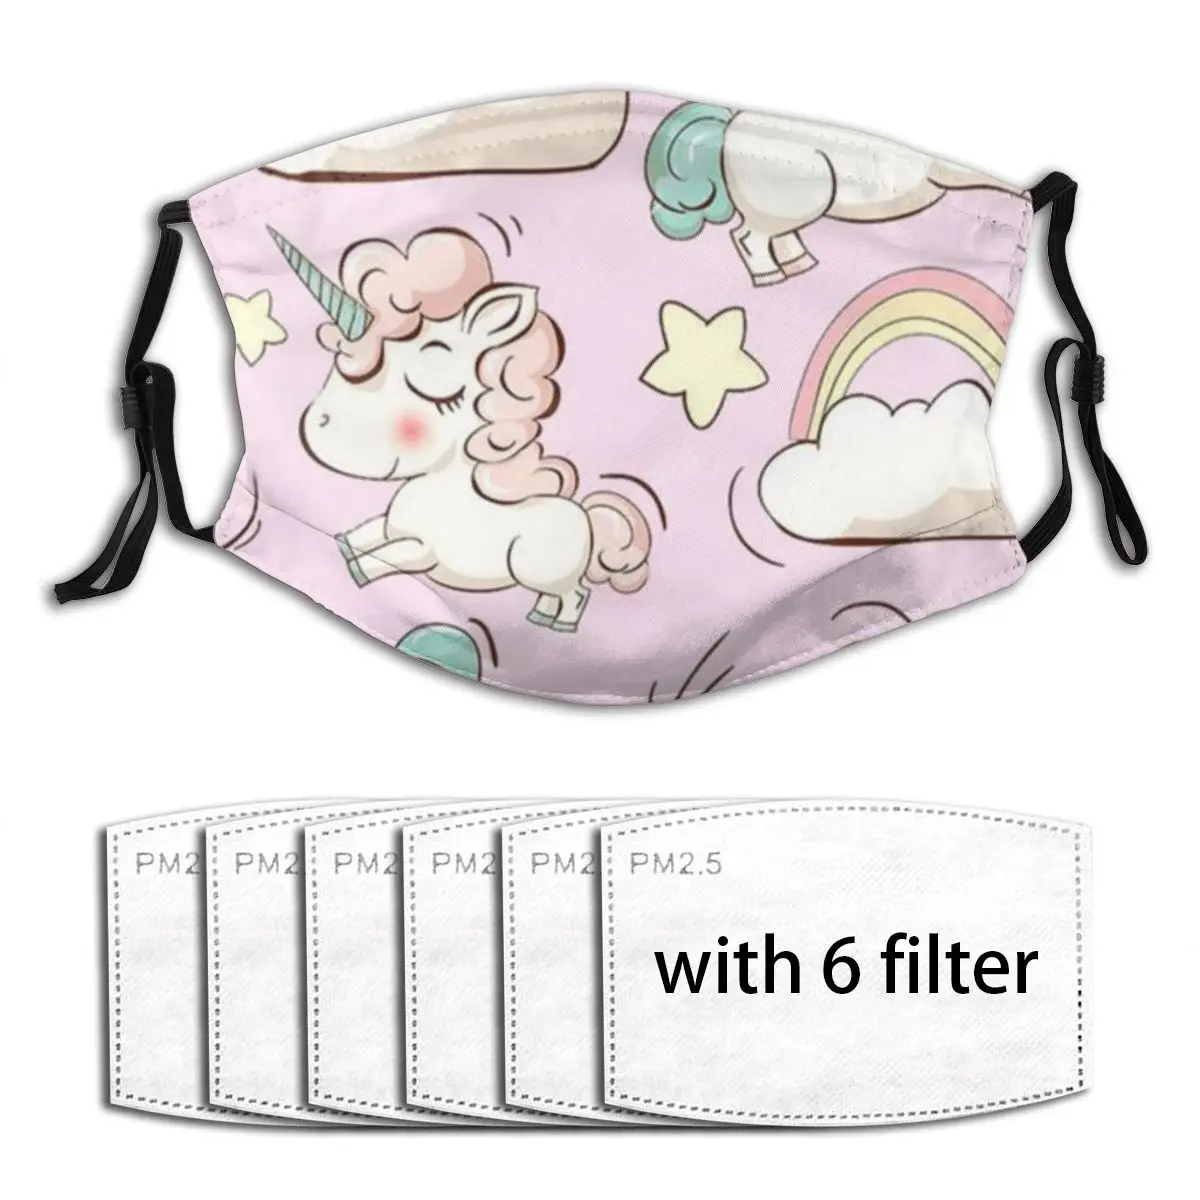 

Windproof Dust Mask with 6 Filter, Pink Unicorn PM2.5 Mouth Face Mask Washable Reusable Anti Pollution Dust